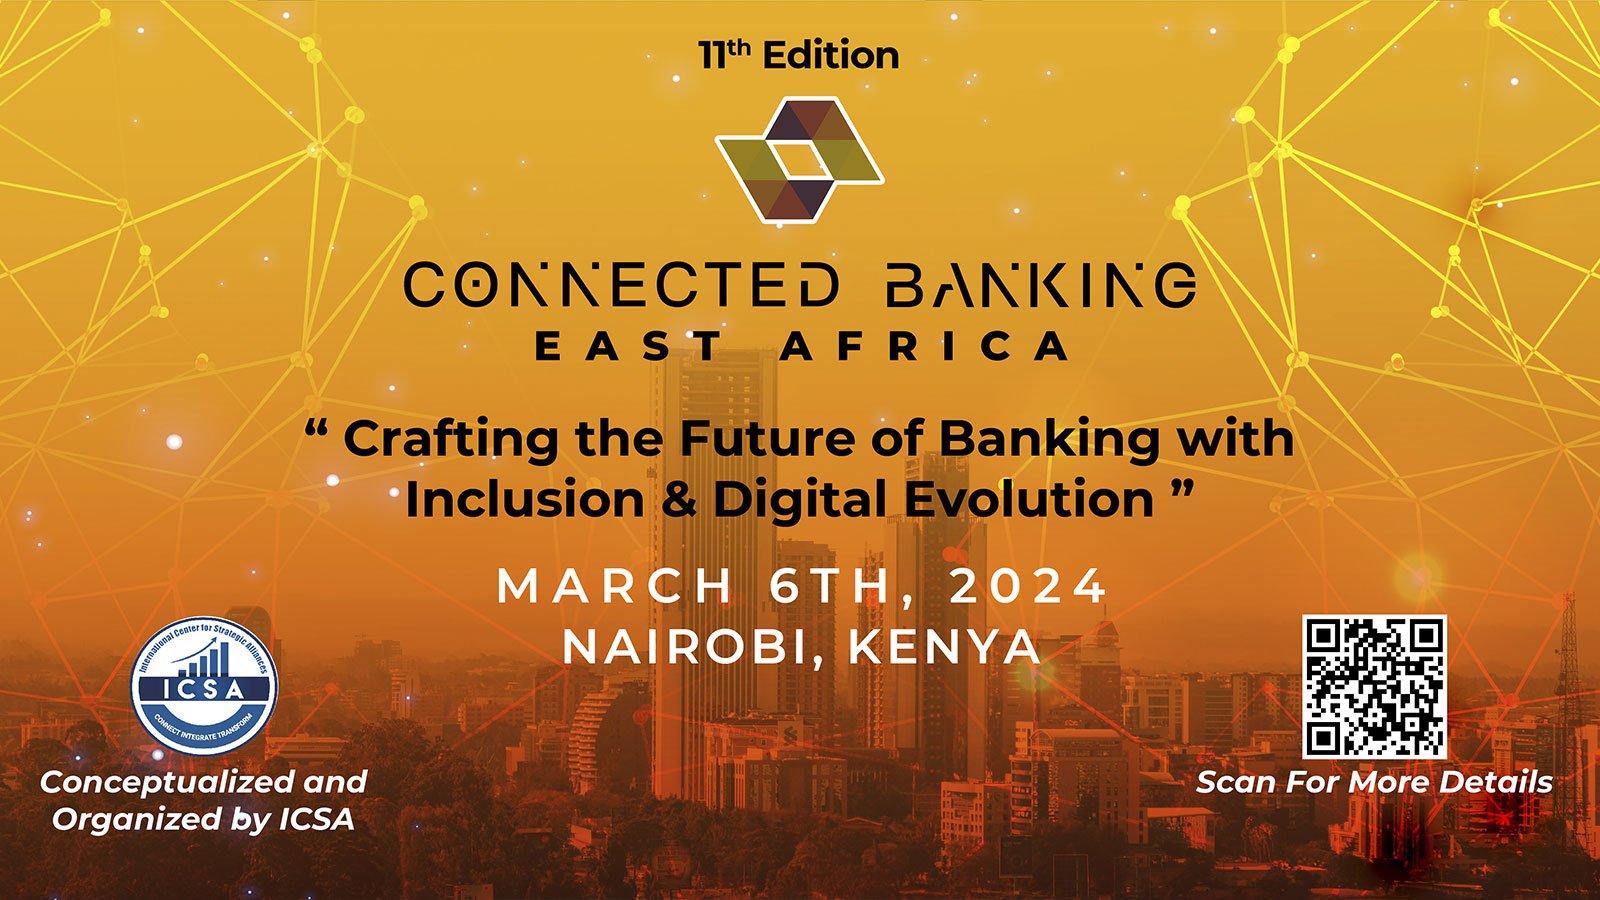 Celebrating Innovation and Excellence in Banking at the 11th Edition Connected Banking Summit- Innovation & Excellence Awards East Africa 2024, Nairobi, Kenya